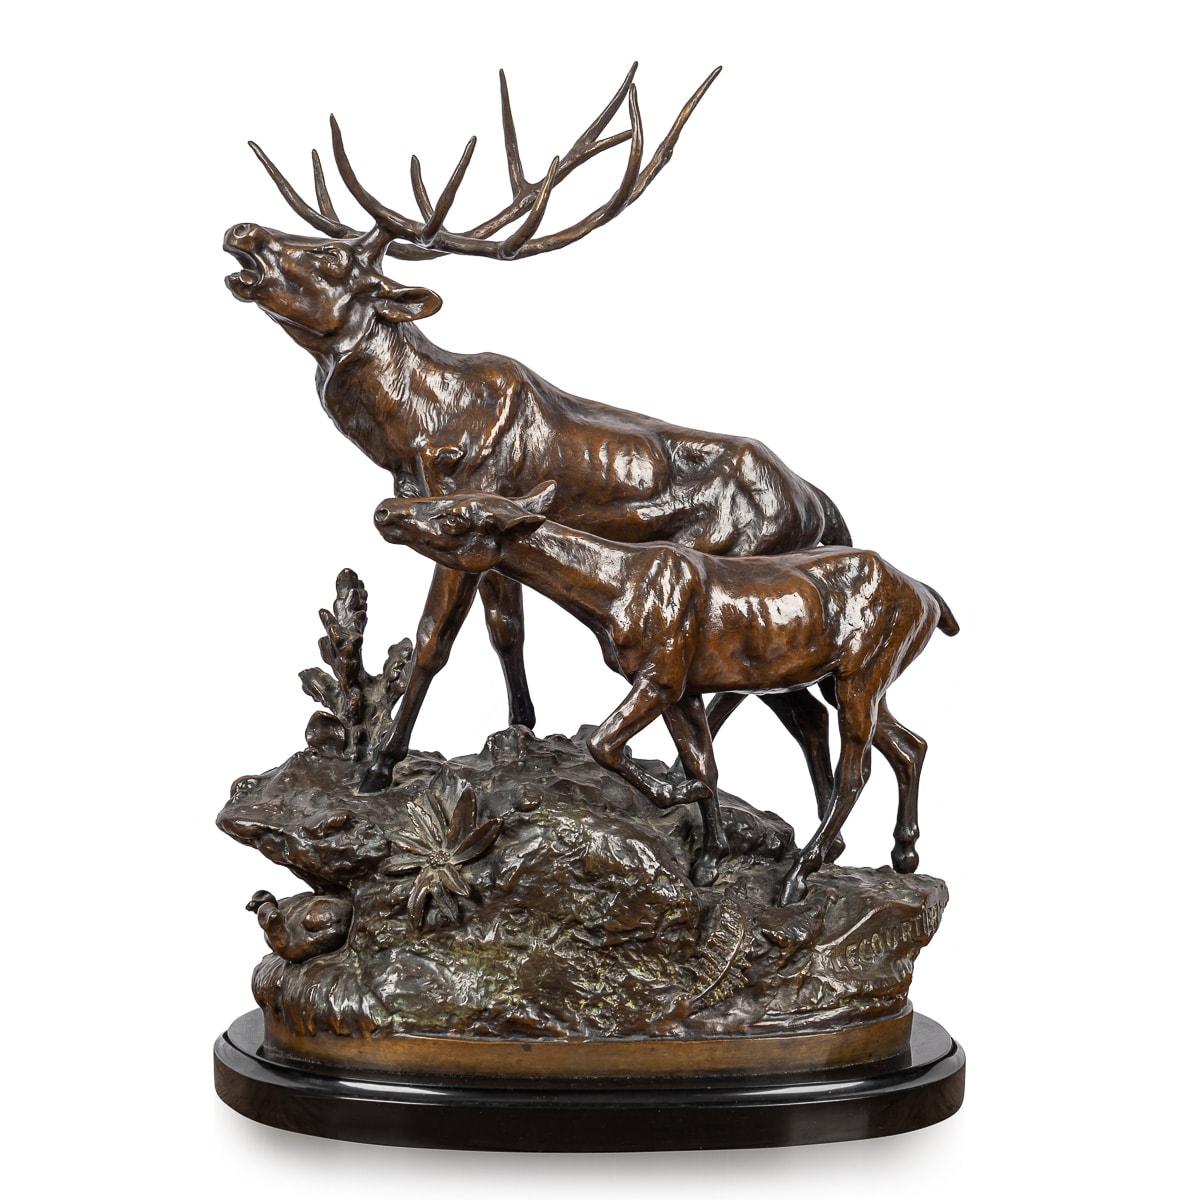 A stunning 19th Century bronze sculpture. Prosper Lecourtier (1851-1924) crafted this bronze sculpture depicting a stag and a doe in a floral forest. At the feet of the animals are a selection of flowers and floral leaves. The base of the bronze is